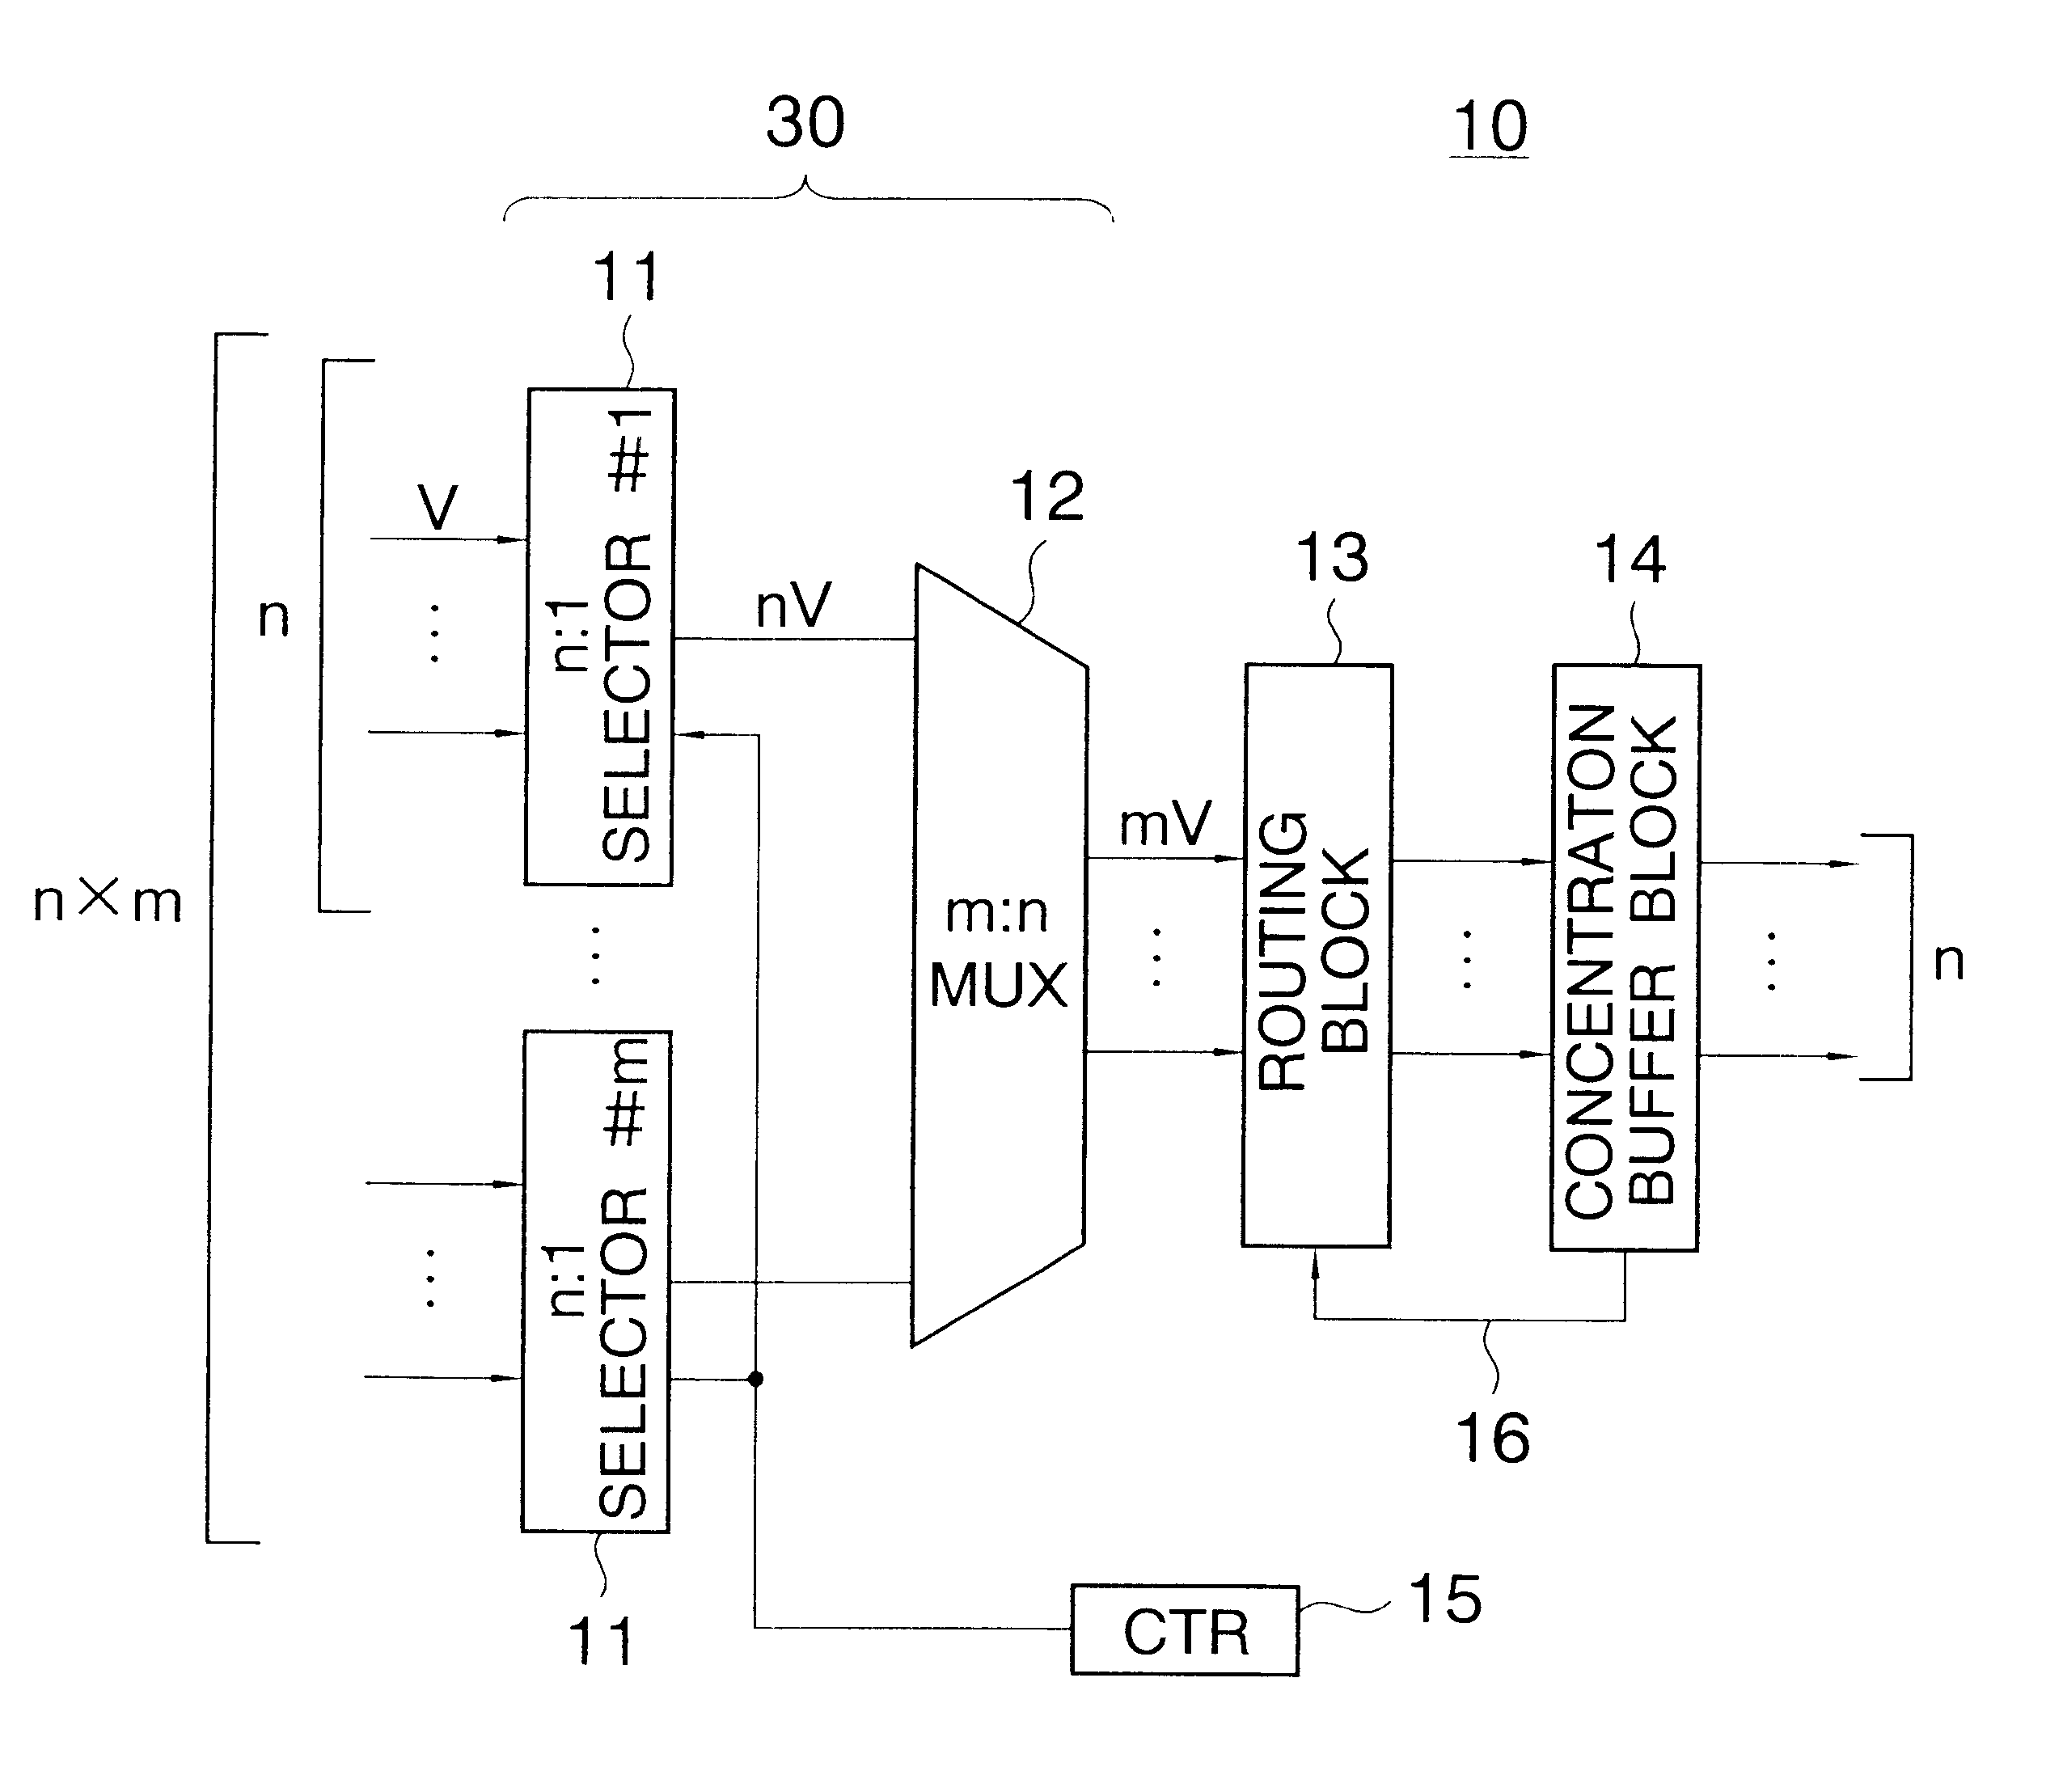 Concentrator type ATM switch for an ATM switching system